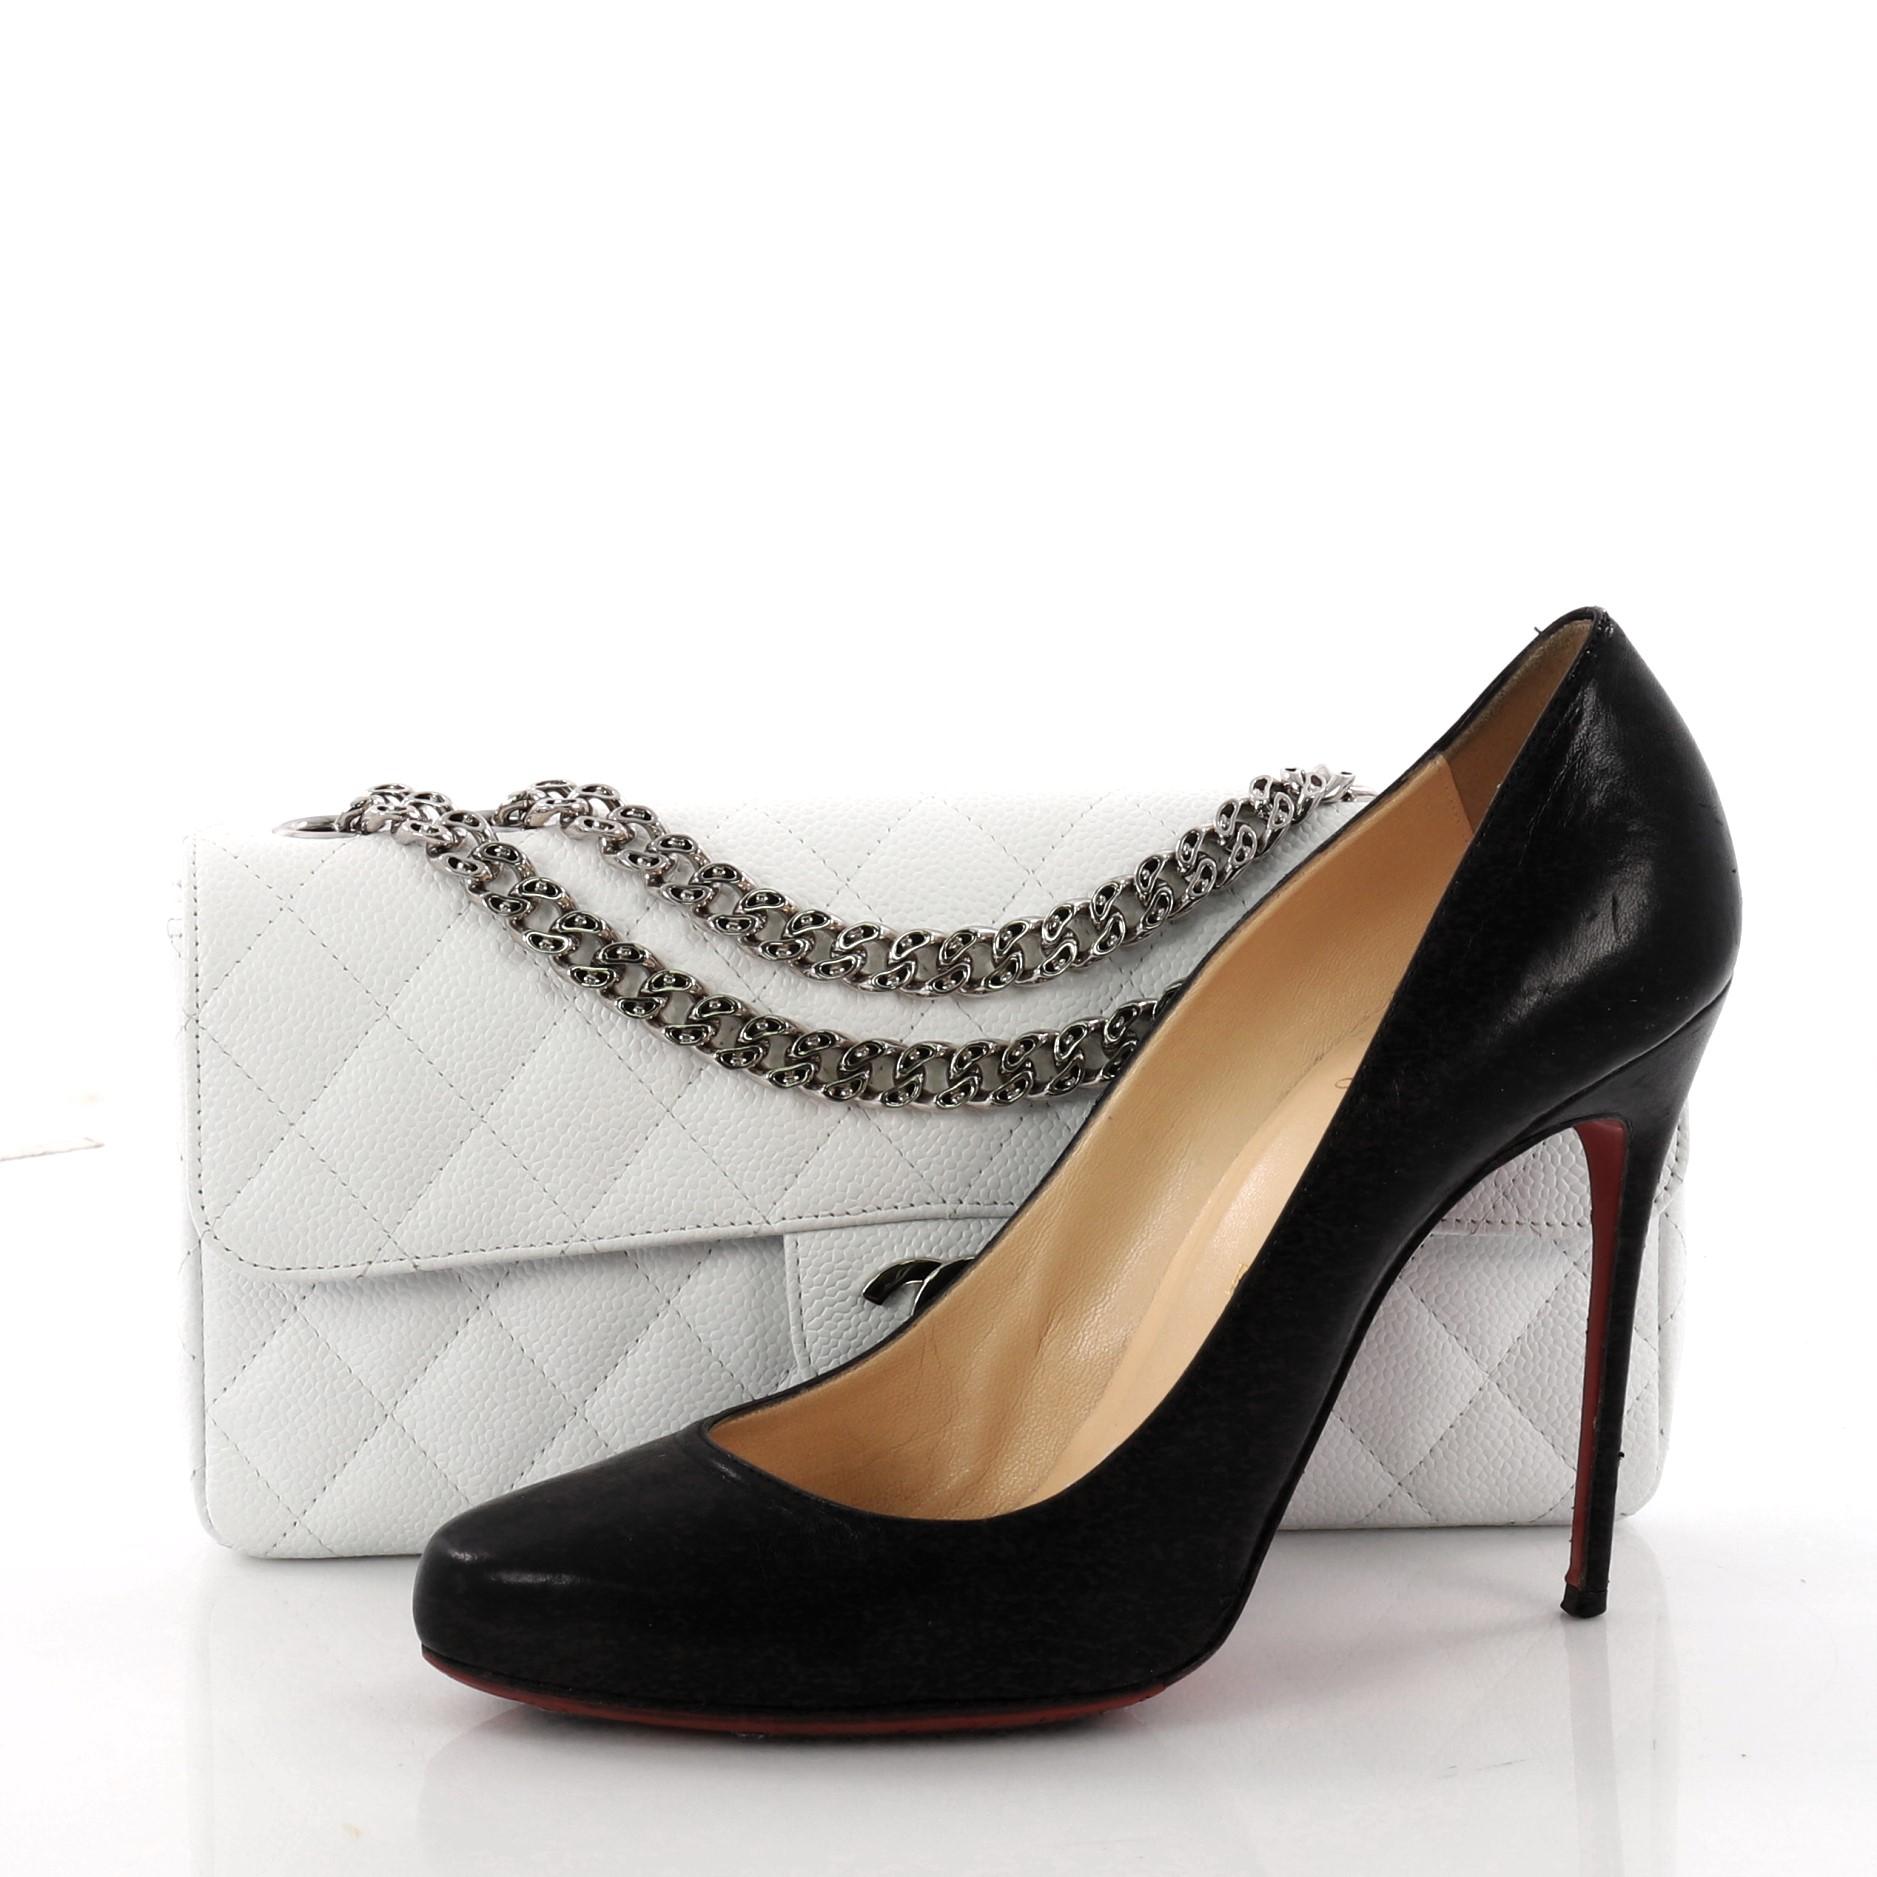 This authentic Chanel Bijoux Chain Flap Bag Quilted Caviar East West is a classic design perfect for transitioning from day-to-evening looks. Crafted from luxurious white caviar leather in signature diamond quilting, this elongated flap bag features